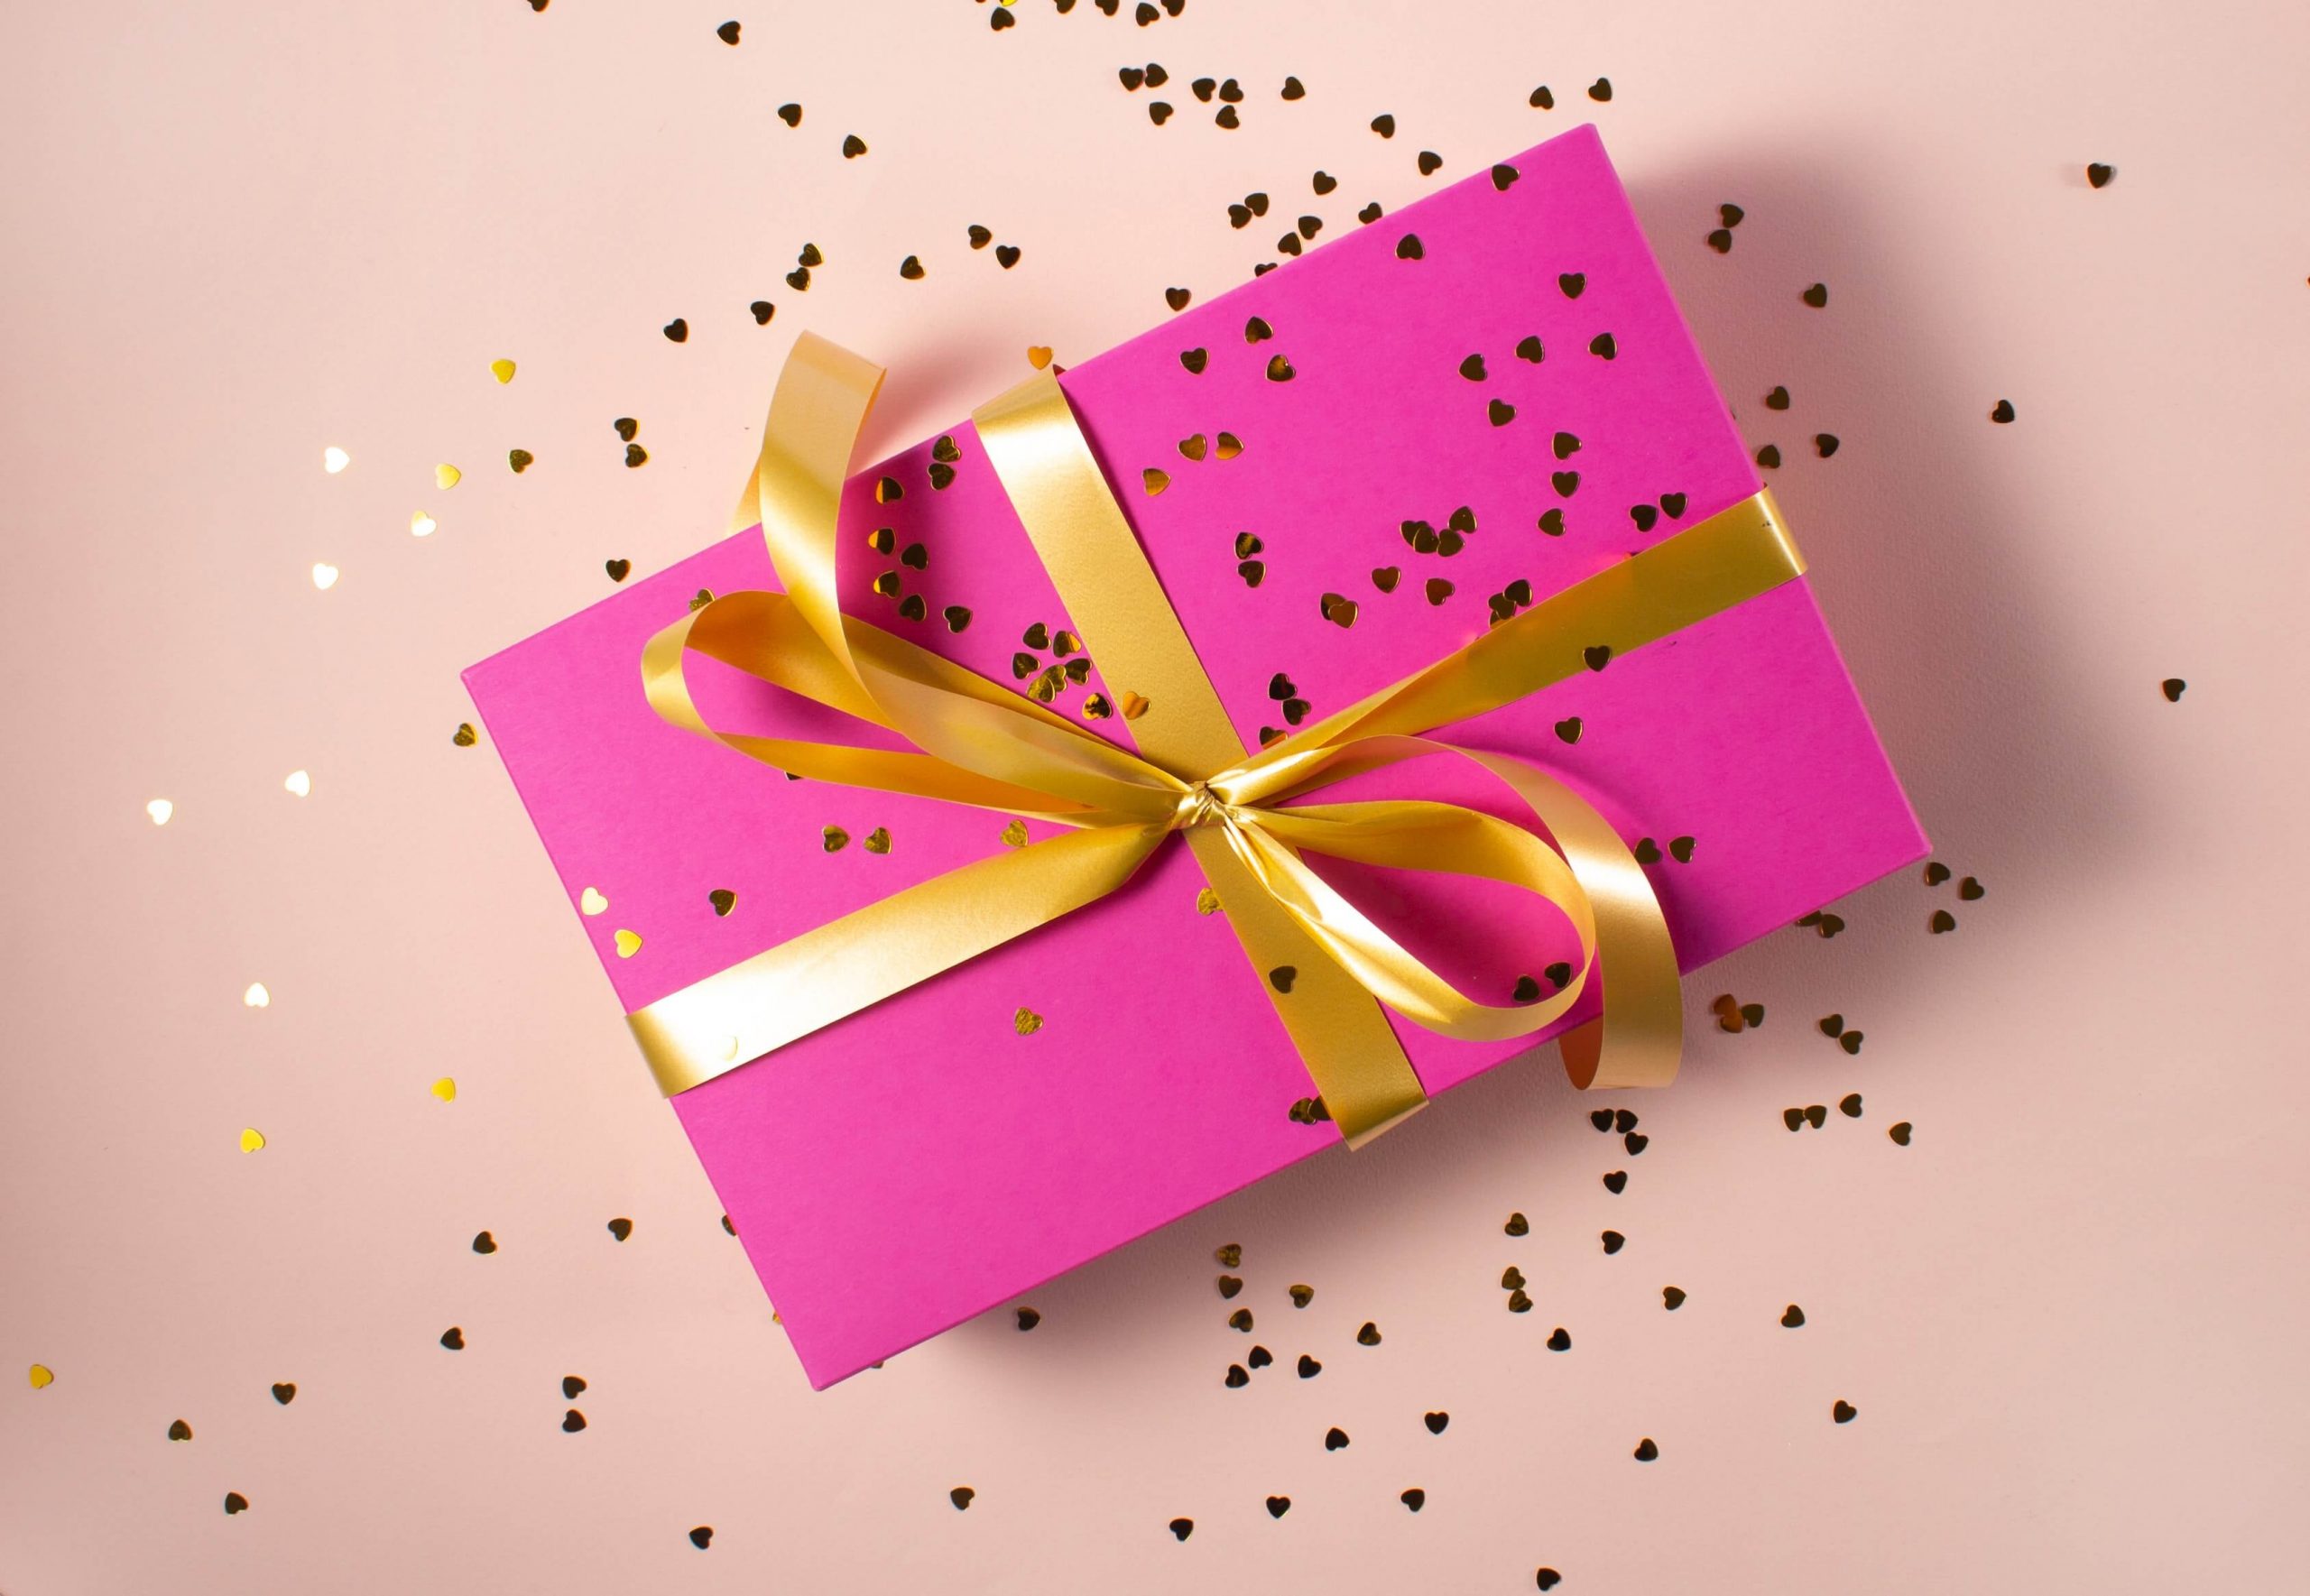 Risky gifts. What gifts are better to avoid?